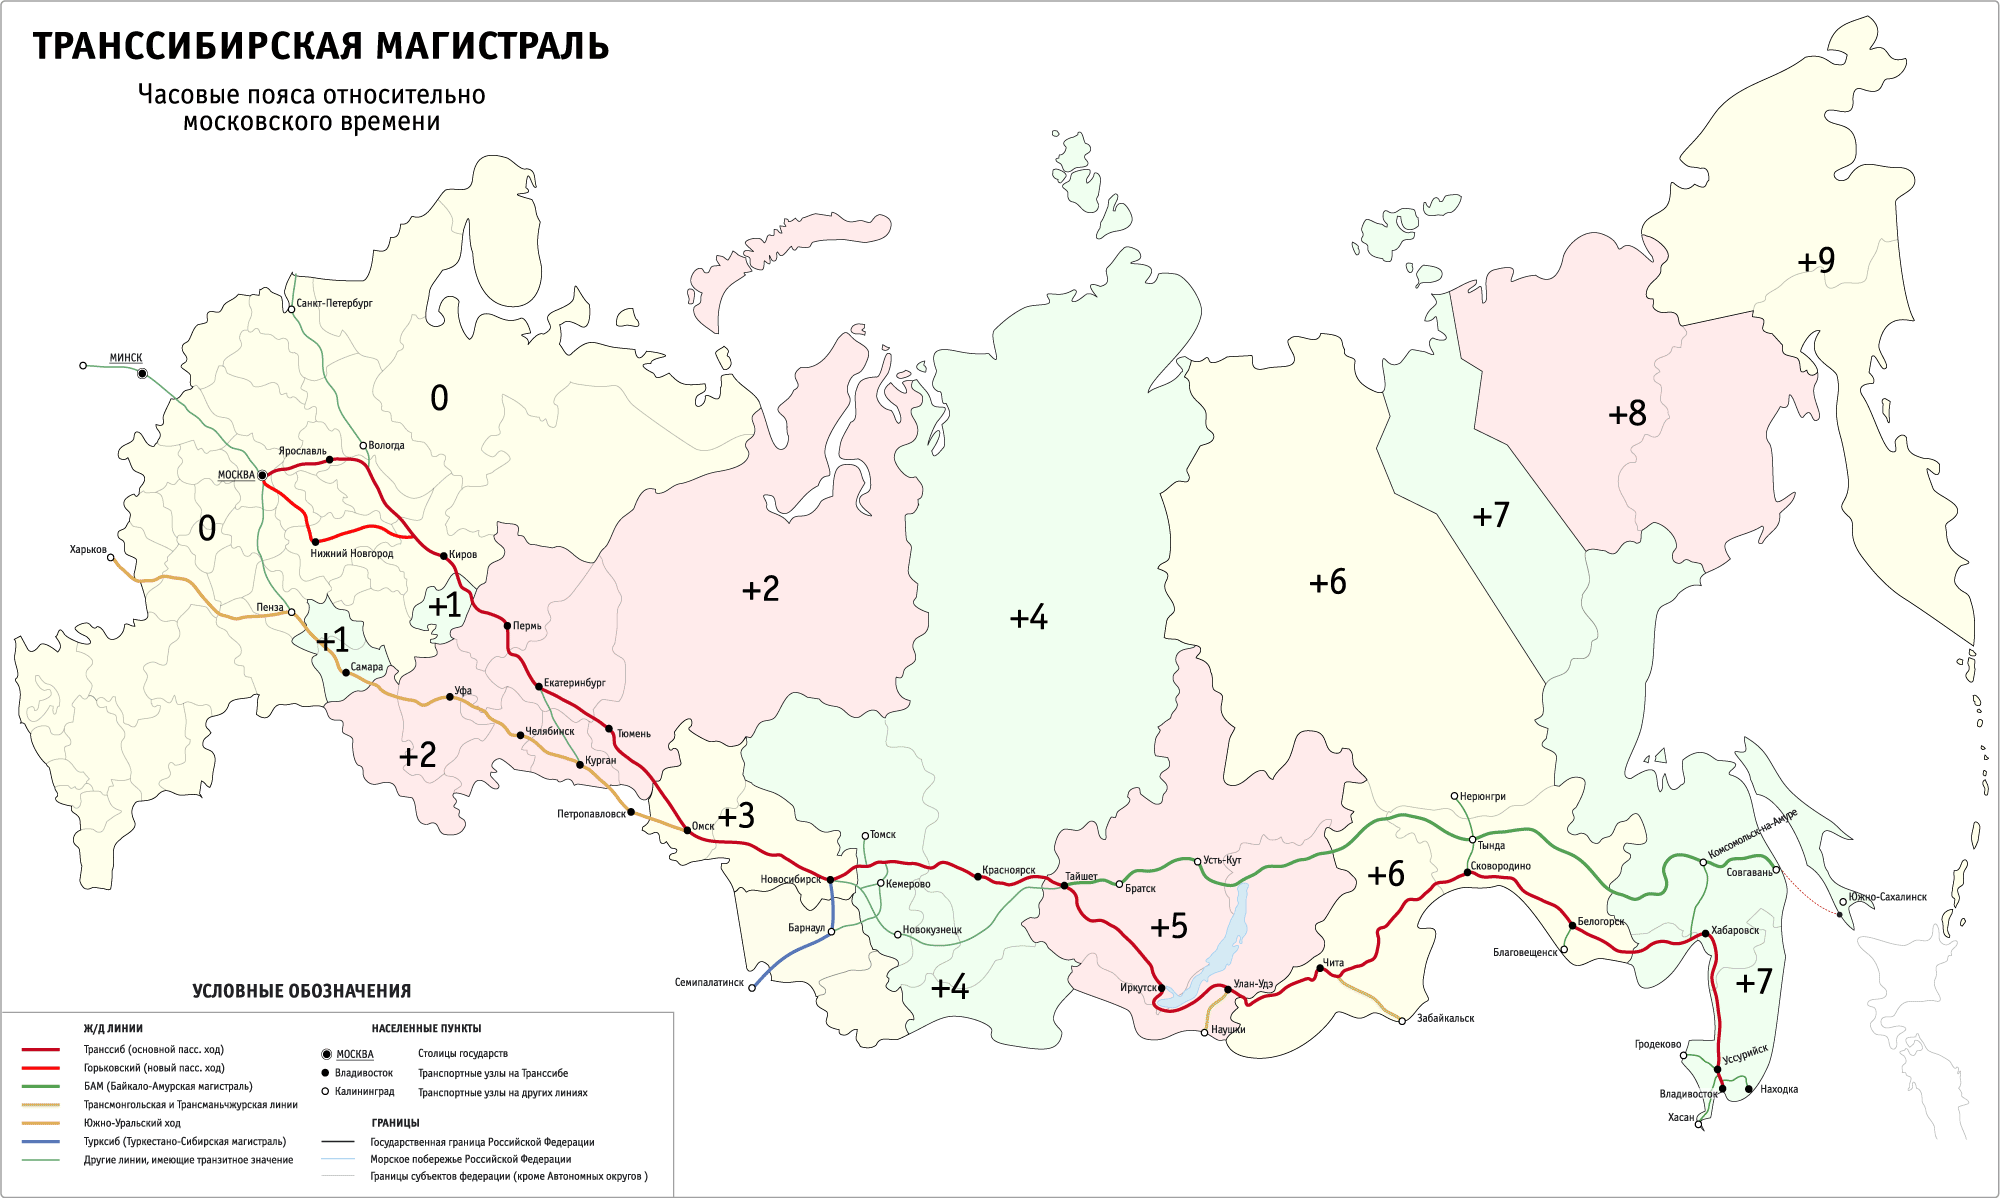 Map of time zones of Russia (2009)